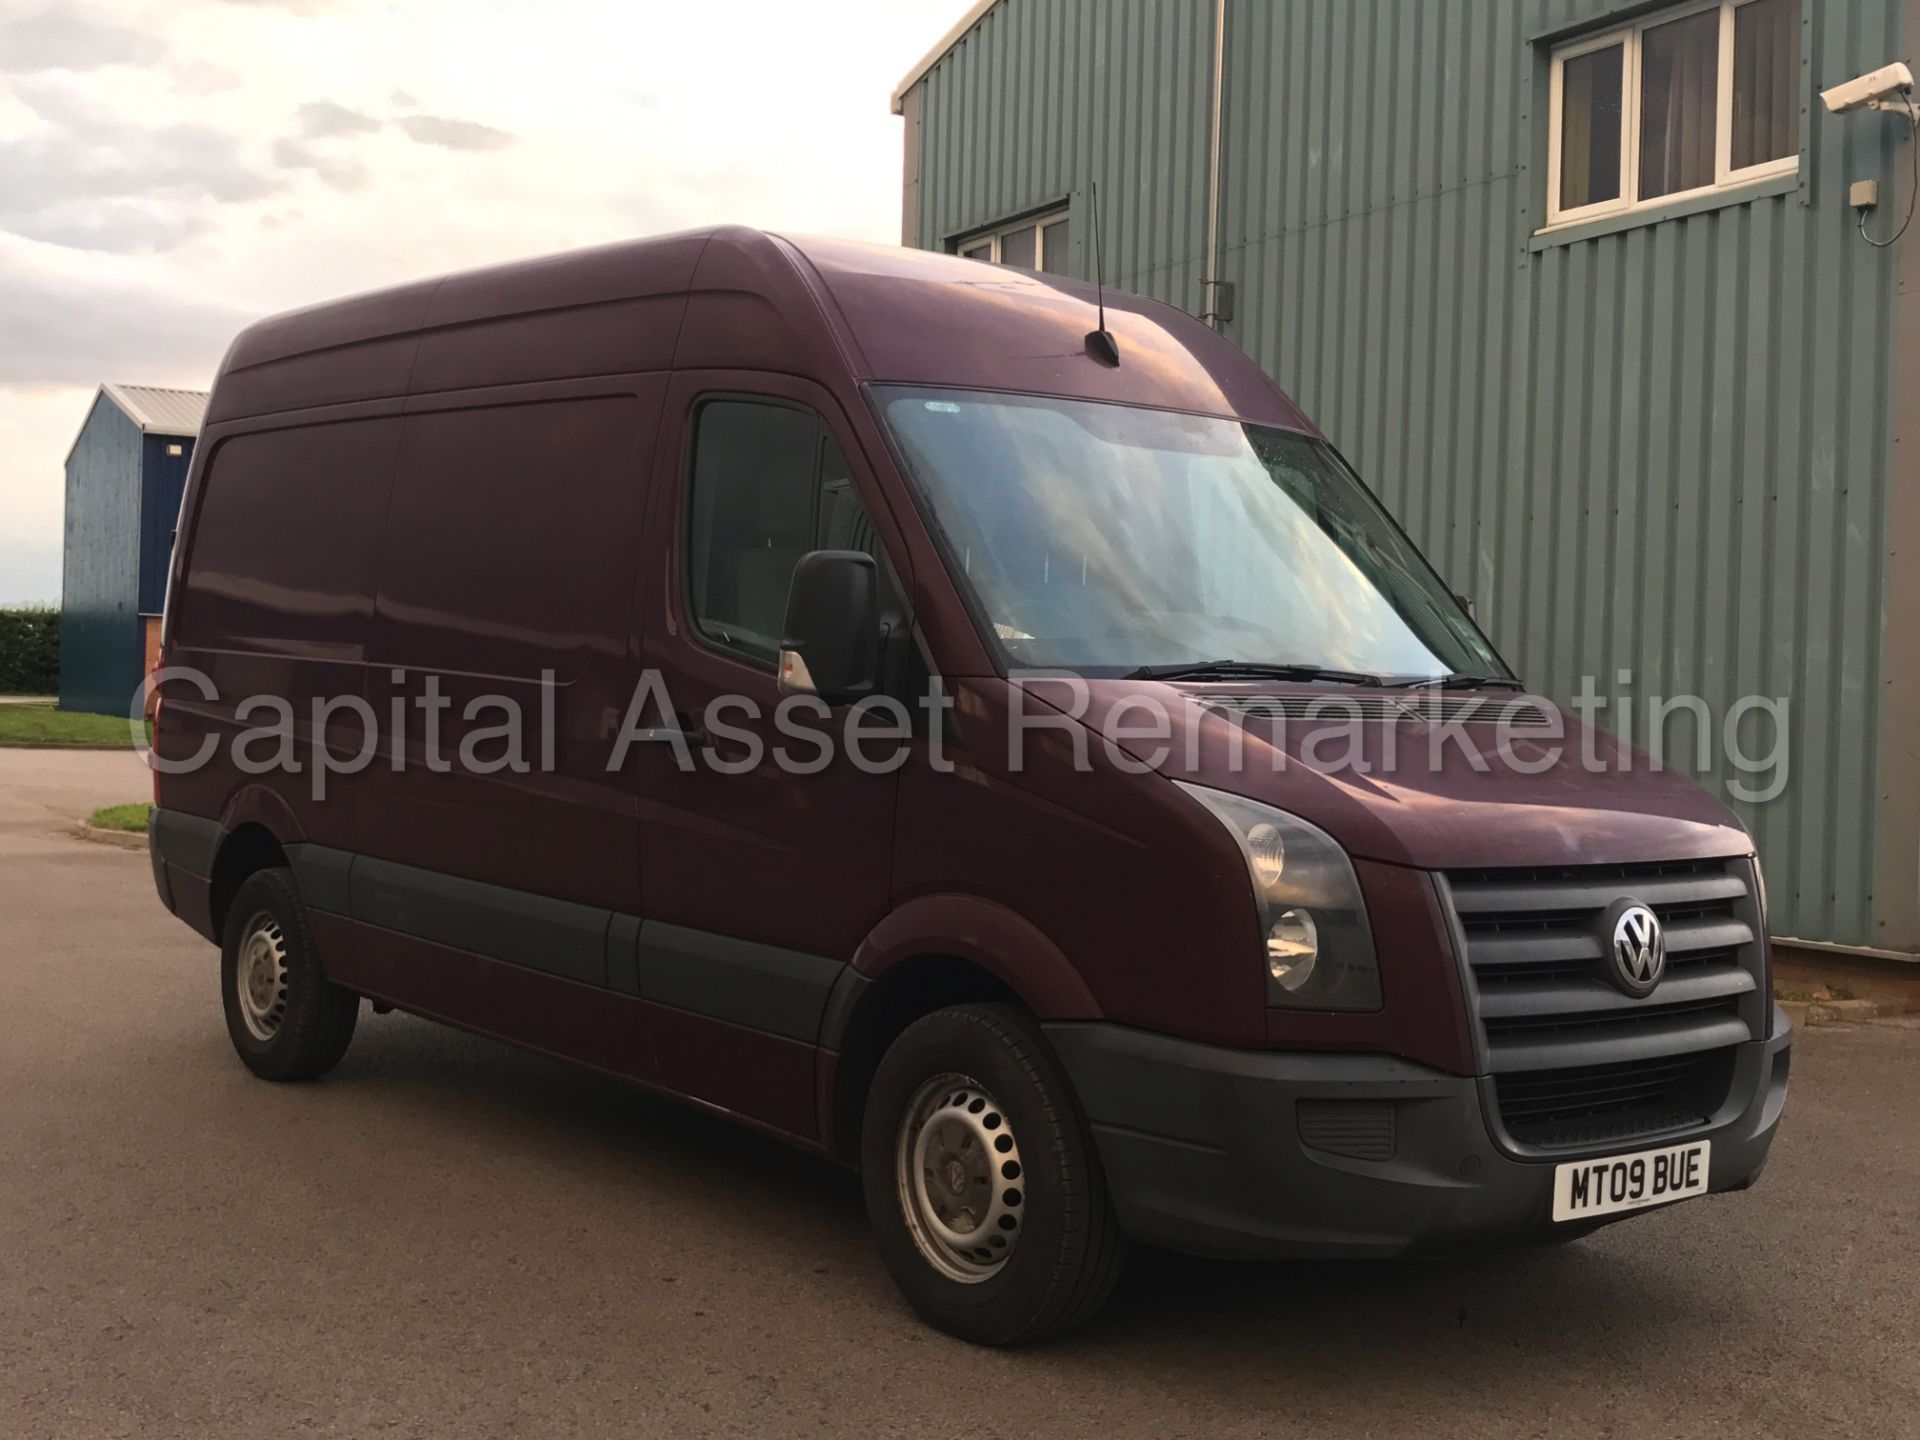 (On Sale) VOLKSWAGEN CRAFTER CR35 'MWB HI-ROOF' (2009) '2.5 TDI - 109 PS - 6 SPEED' **LOW MILES**